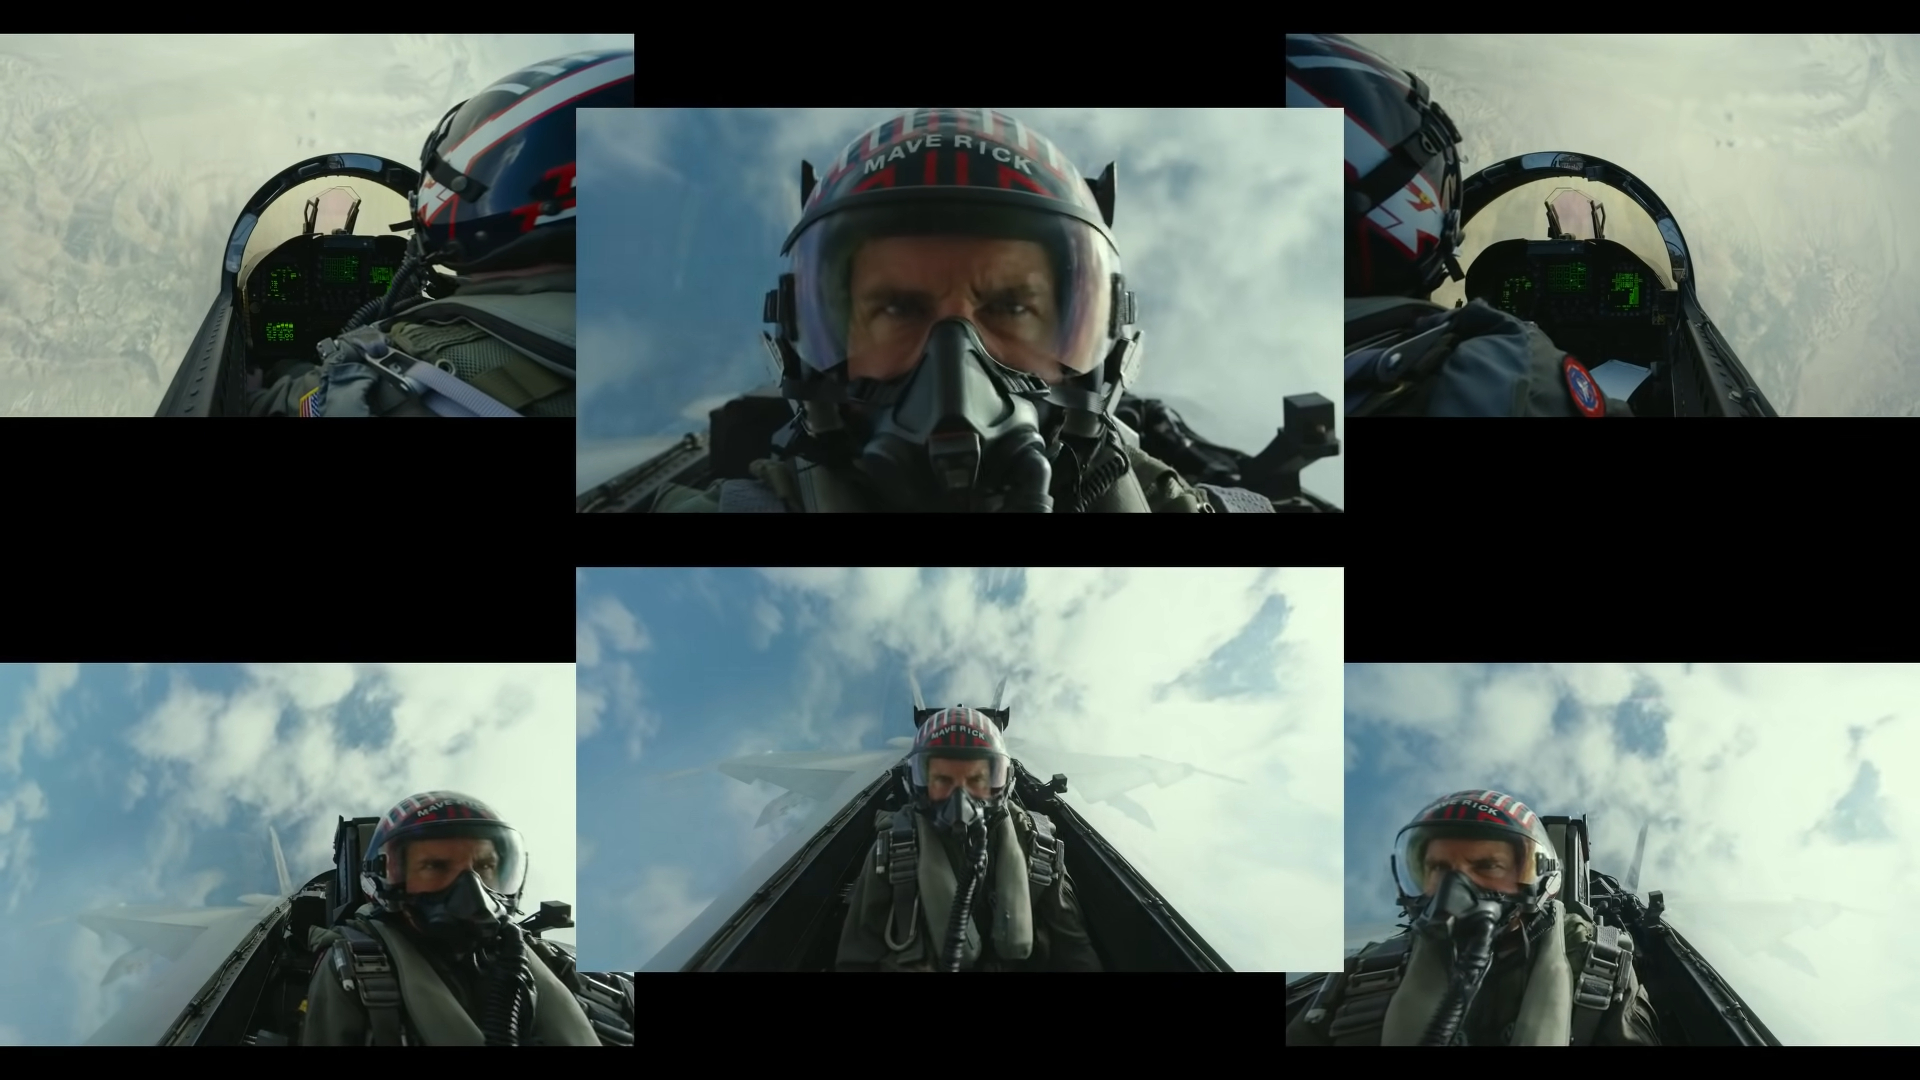 Top Gun: Maverick got the green light in the most Tom Cruise way possible